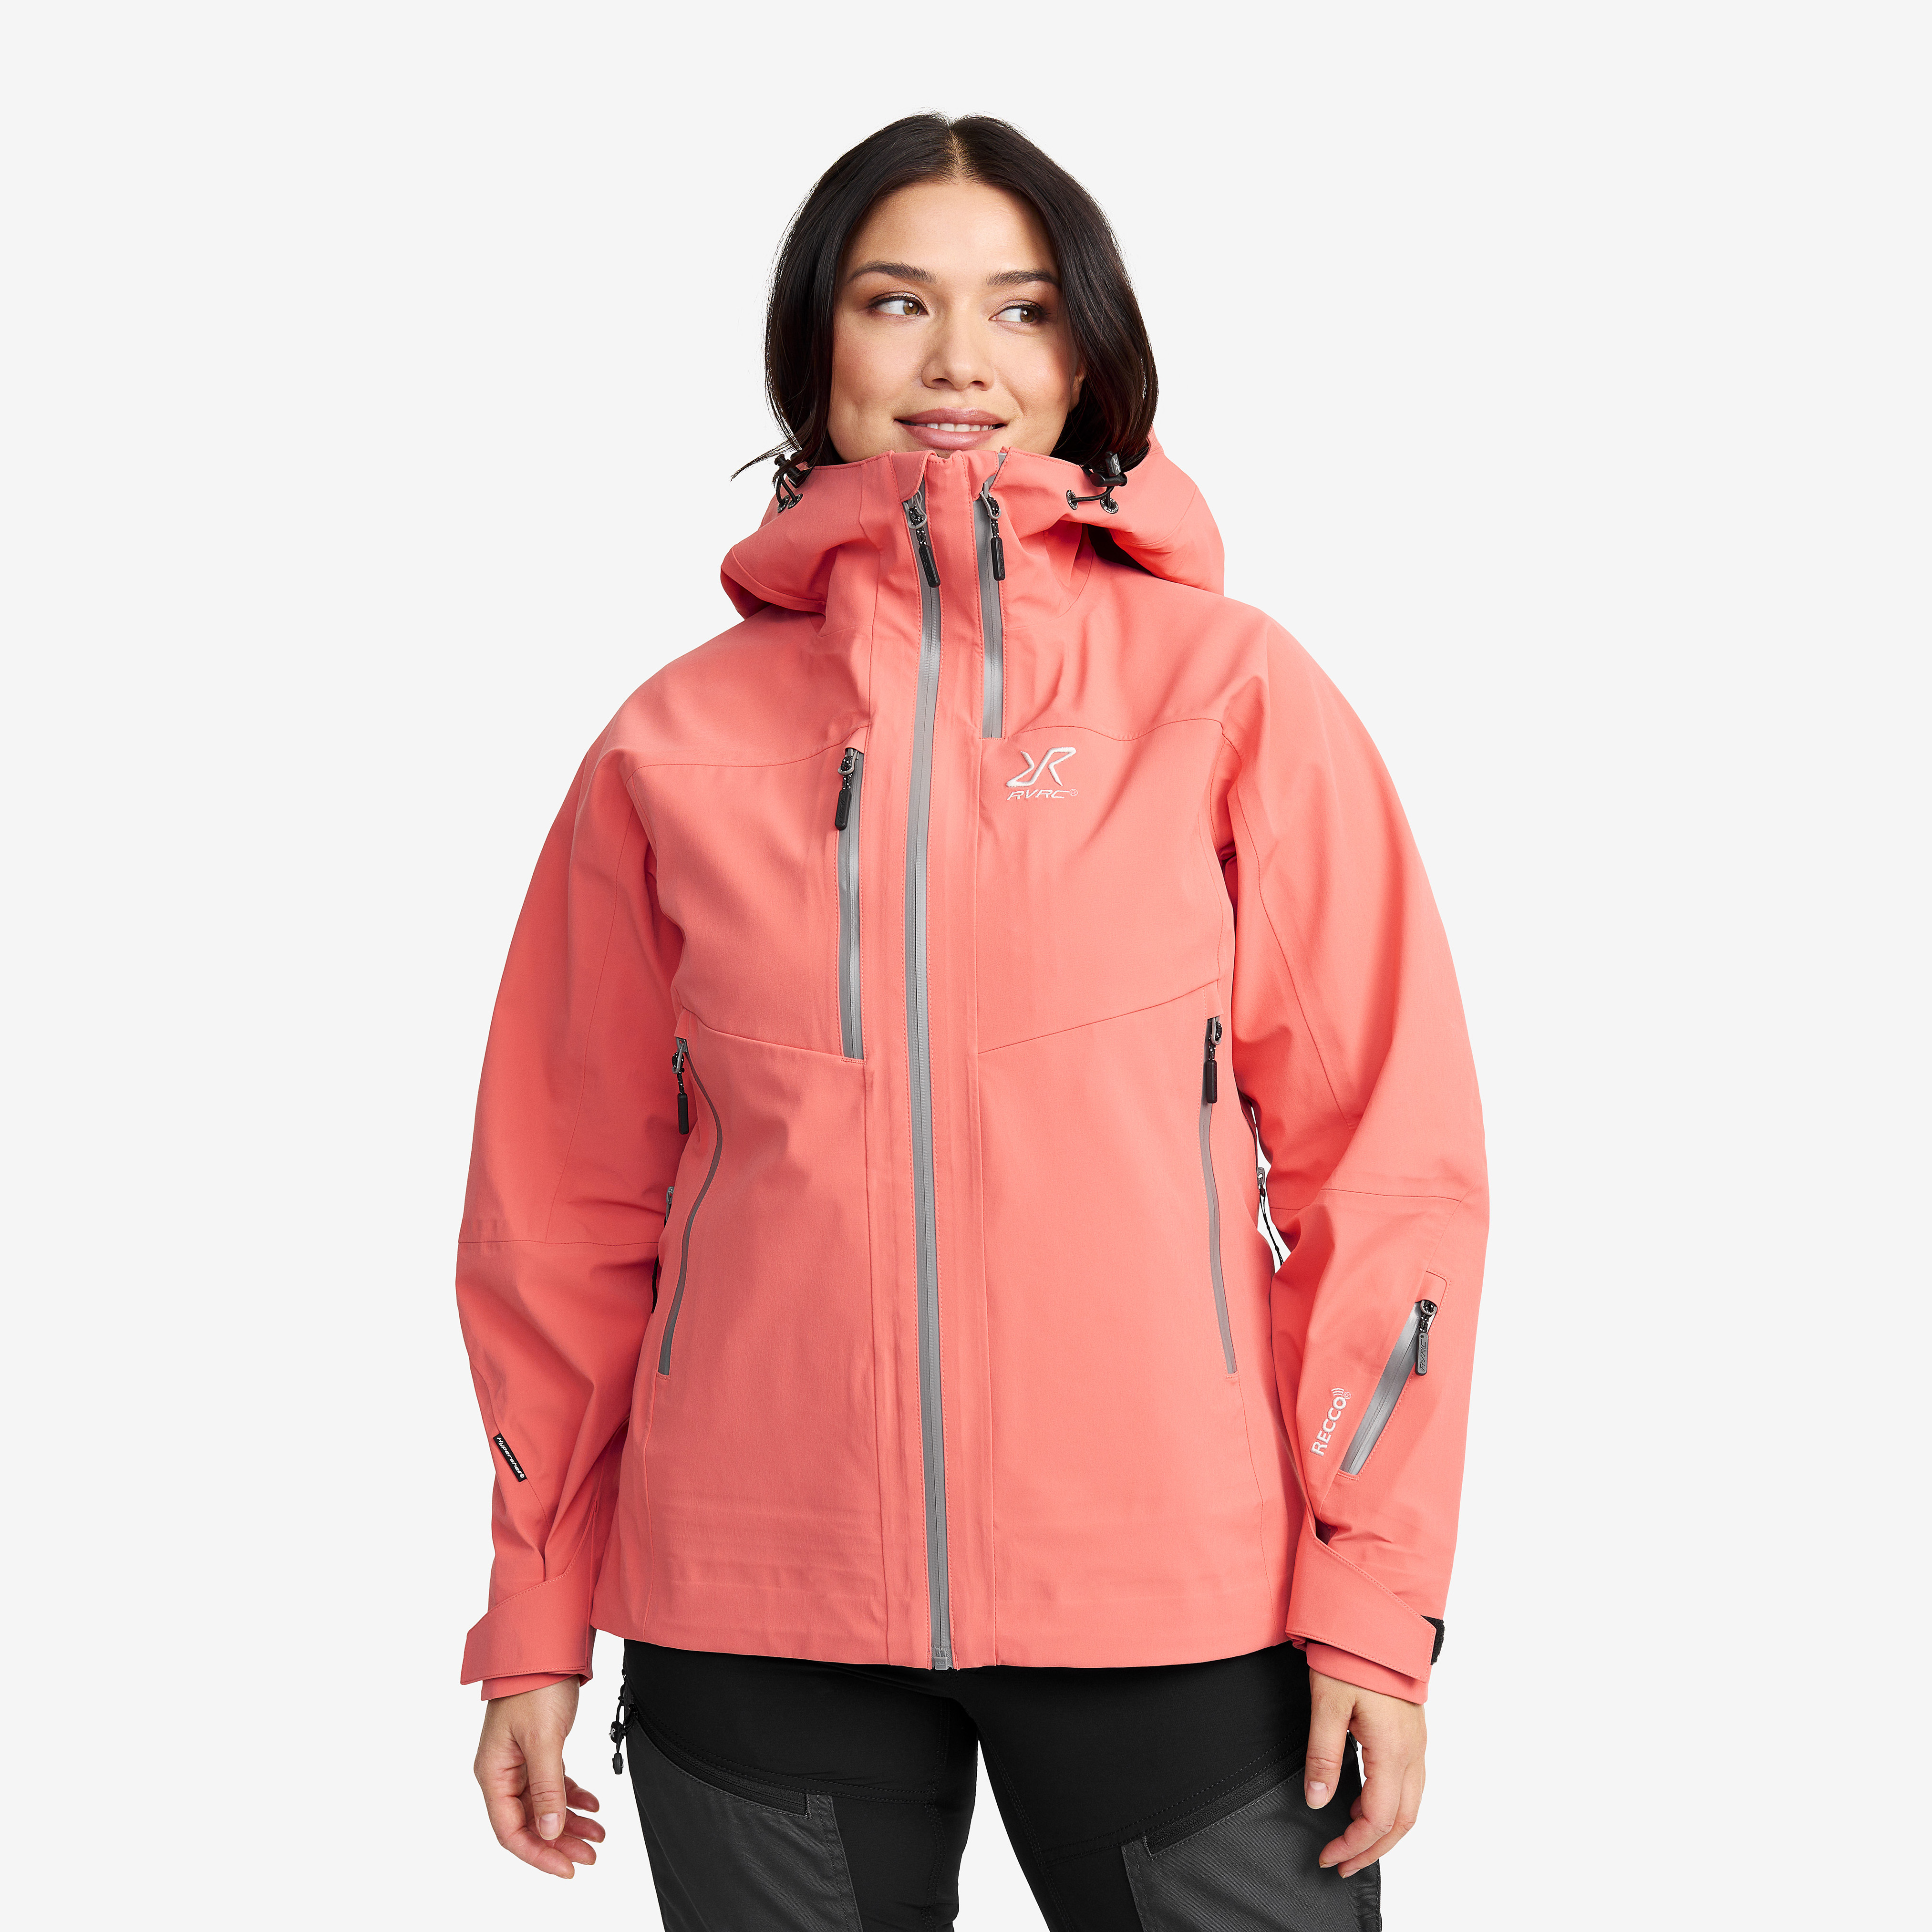 Cyclone 3L Shell Jacket Porcelain Rose Mujeres